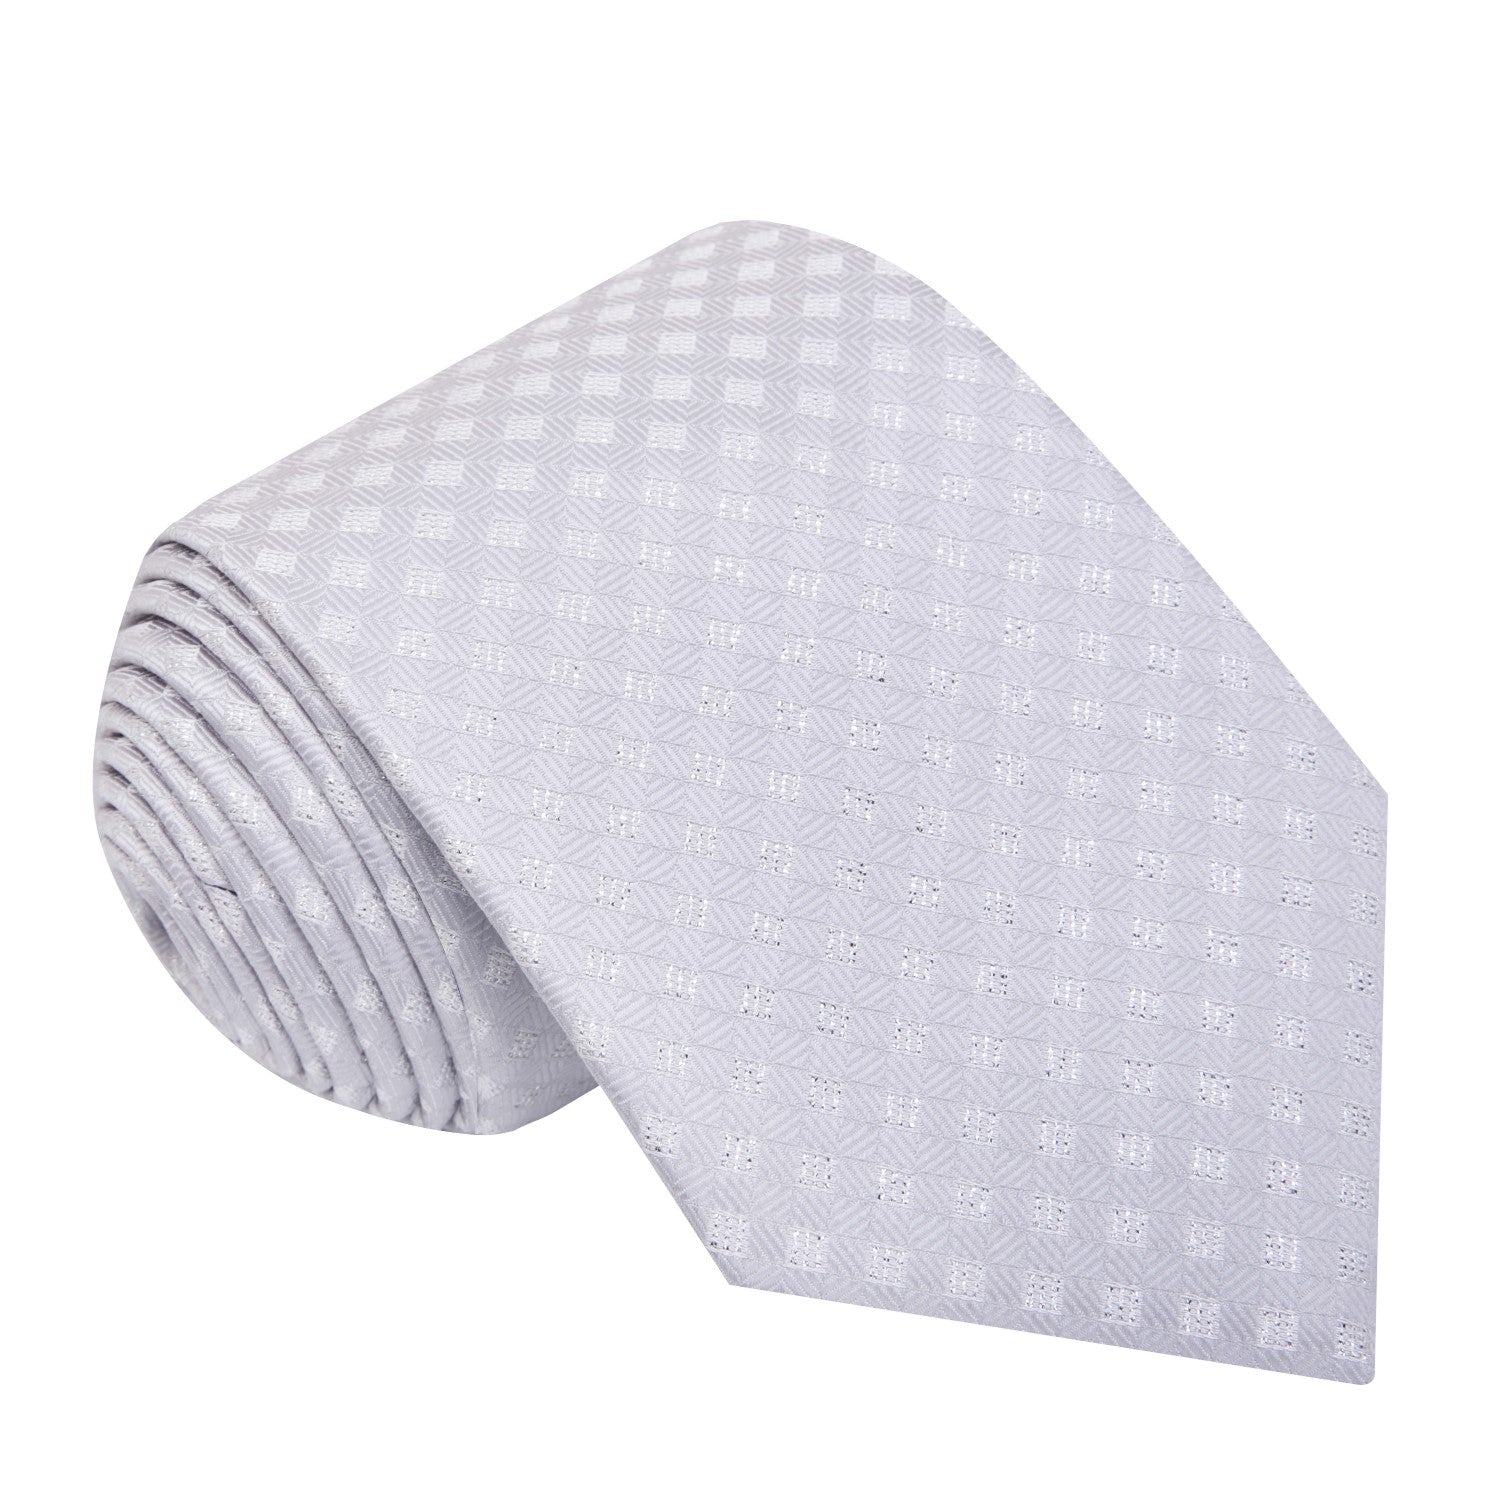 A Platinum Colored Tie With Metallic Looking Check Accent Pattern Silk Necktie  